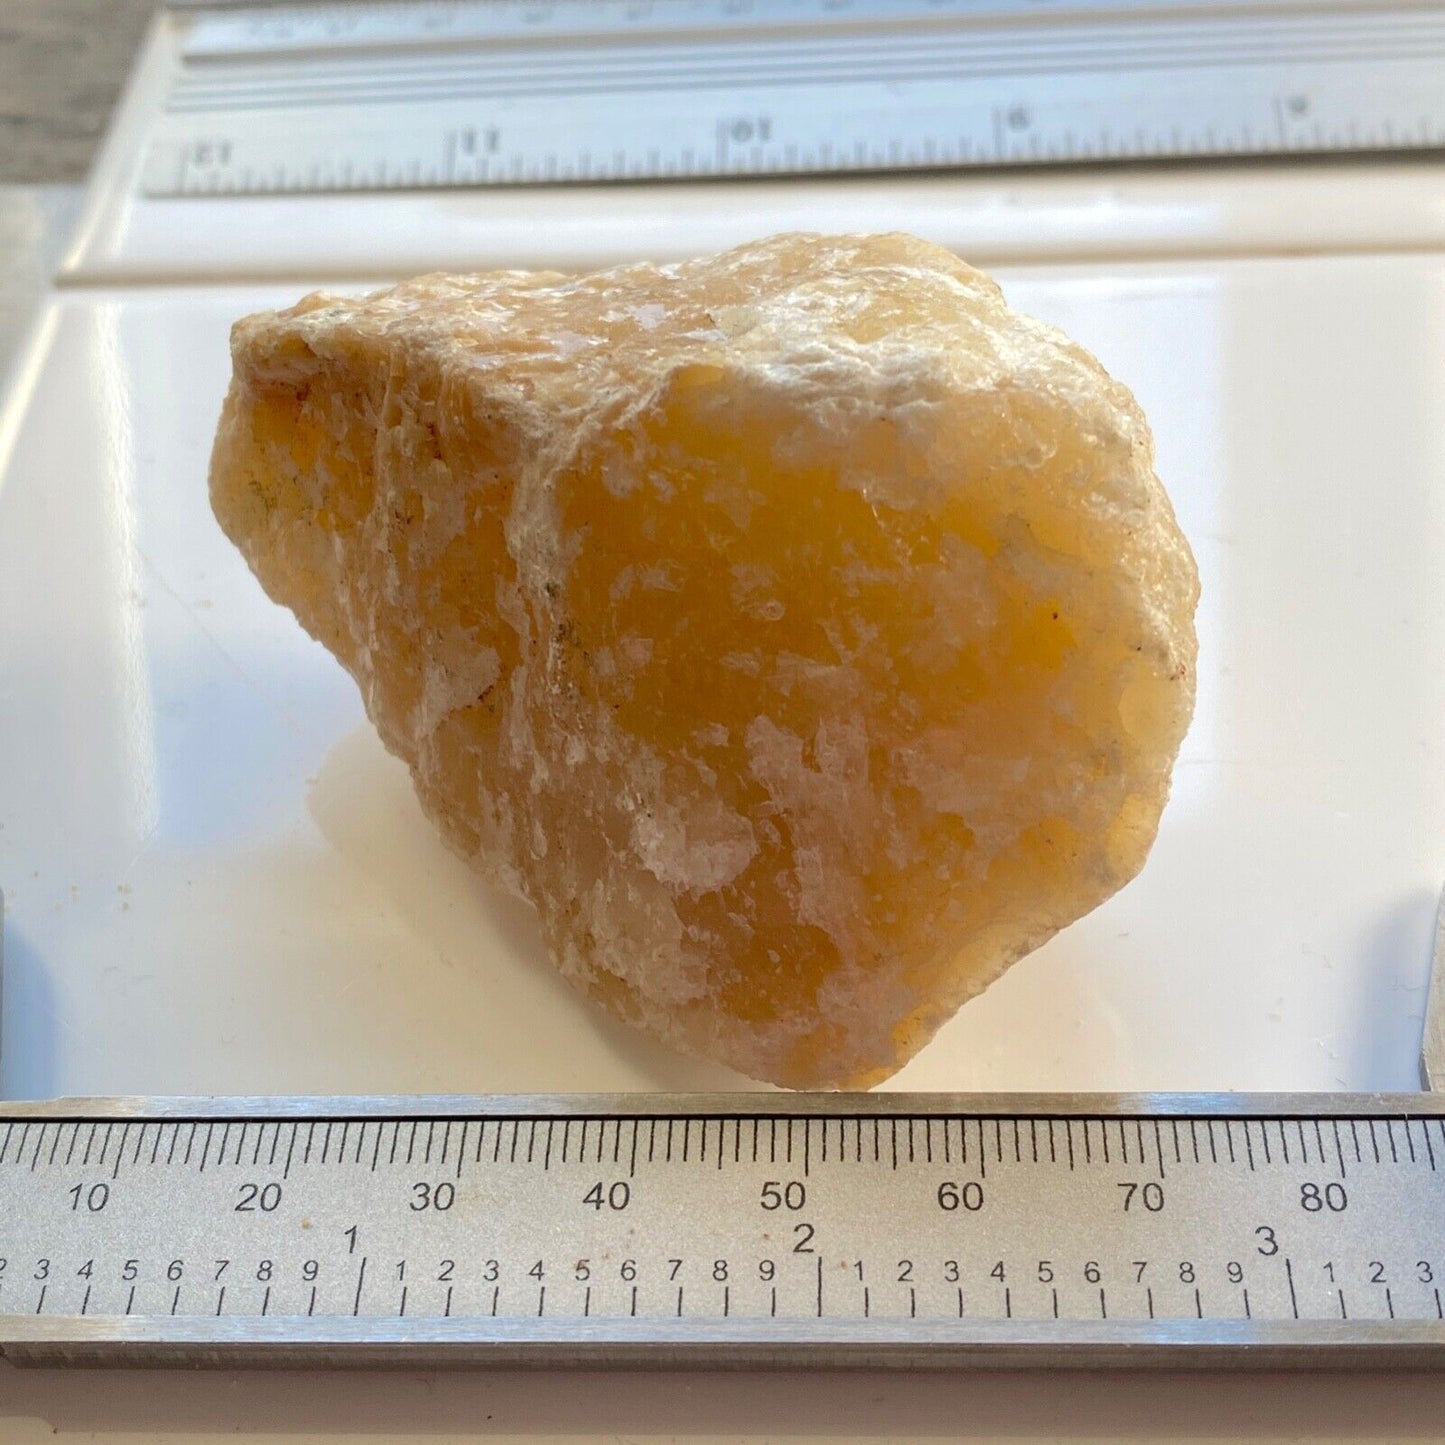 WOLLASTONITE FROM FRANKLIN MINING DISTRICT, USA. 140g MF757